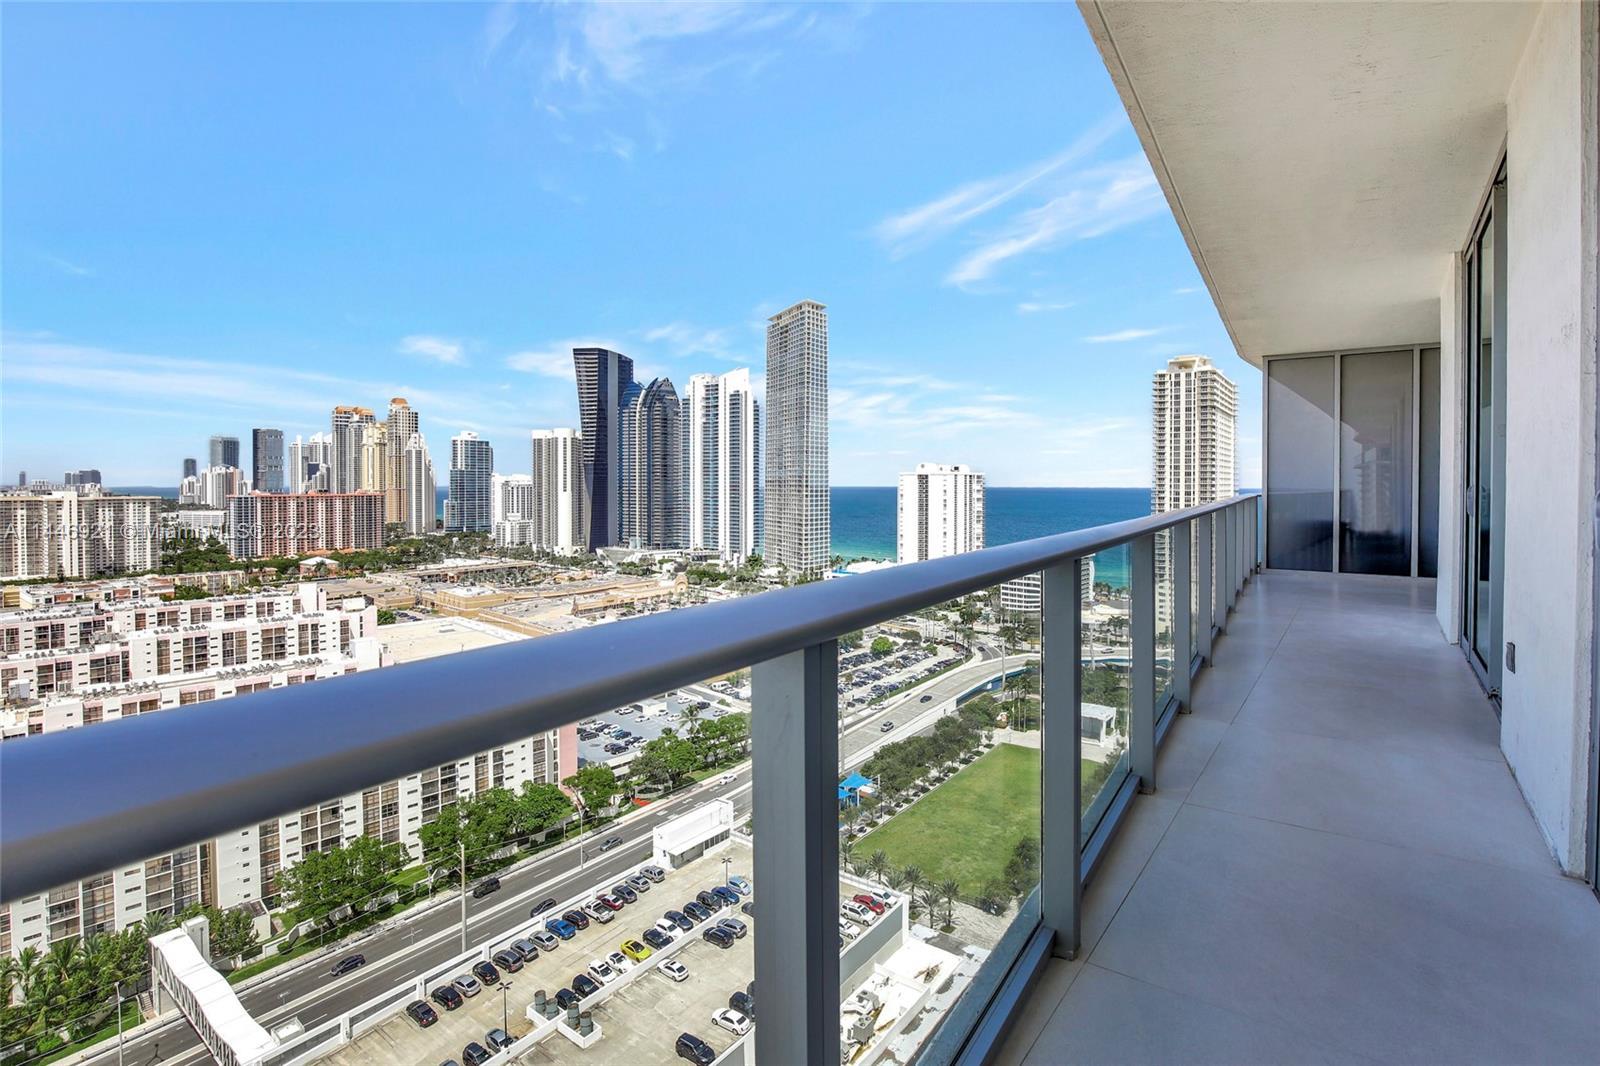 This 25th-floor unit has views spanning from the ocean to the Intracoastal. With over 1,500 square f